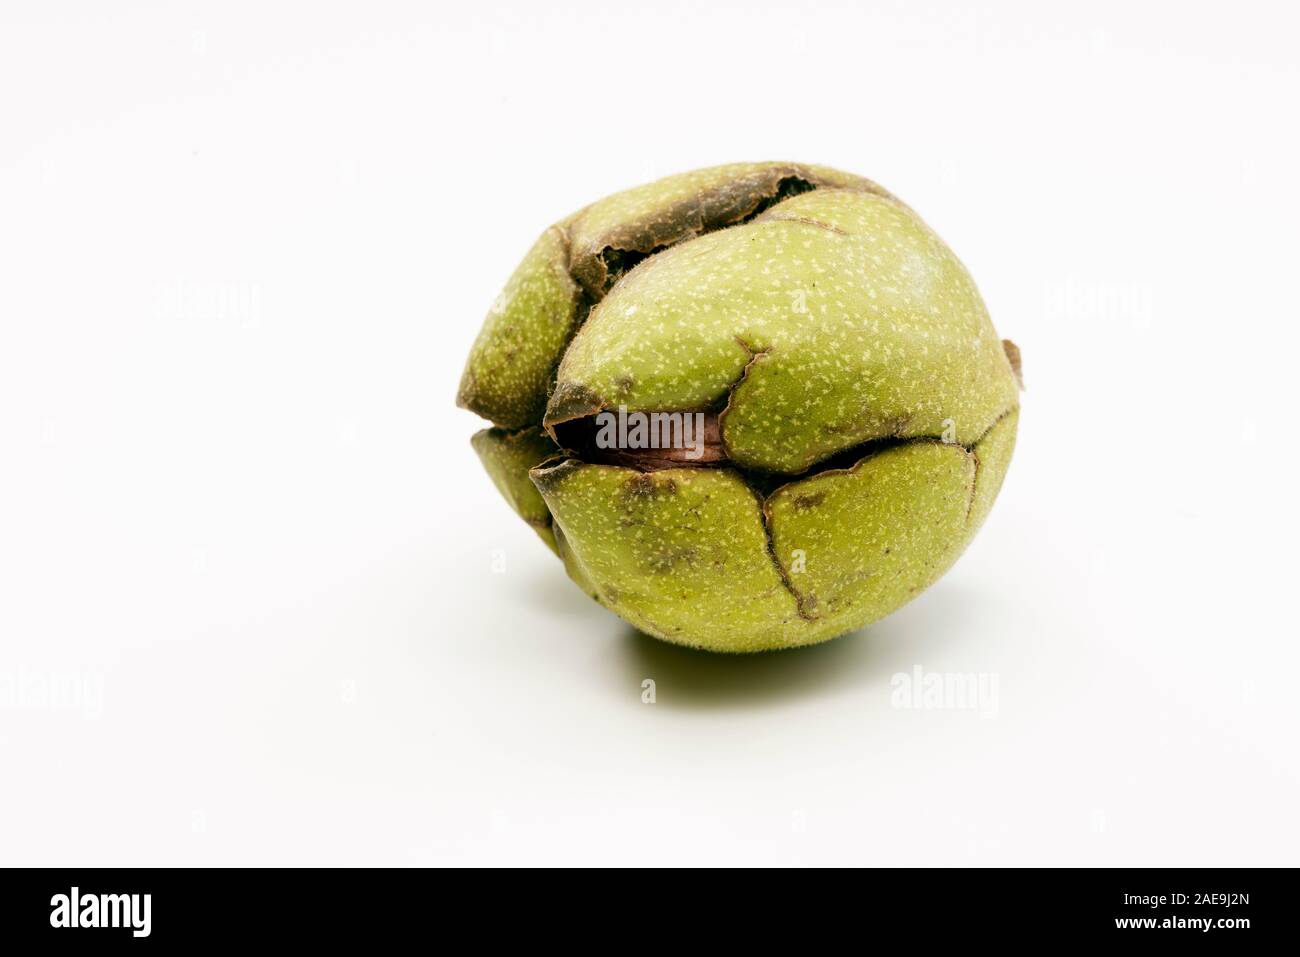 Close up shot of a raw wallnut with green shell. Stock Photo